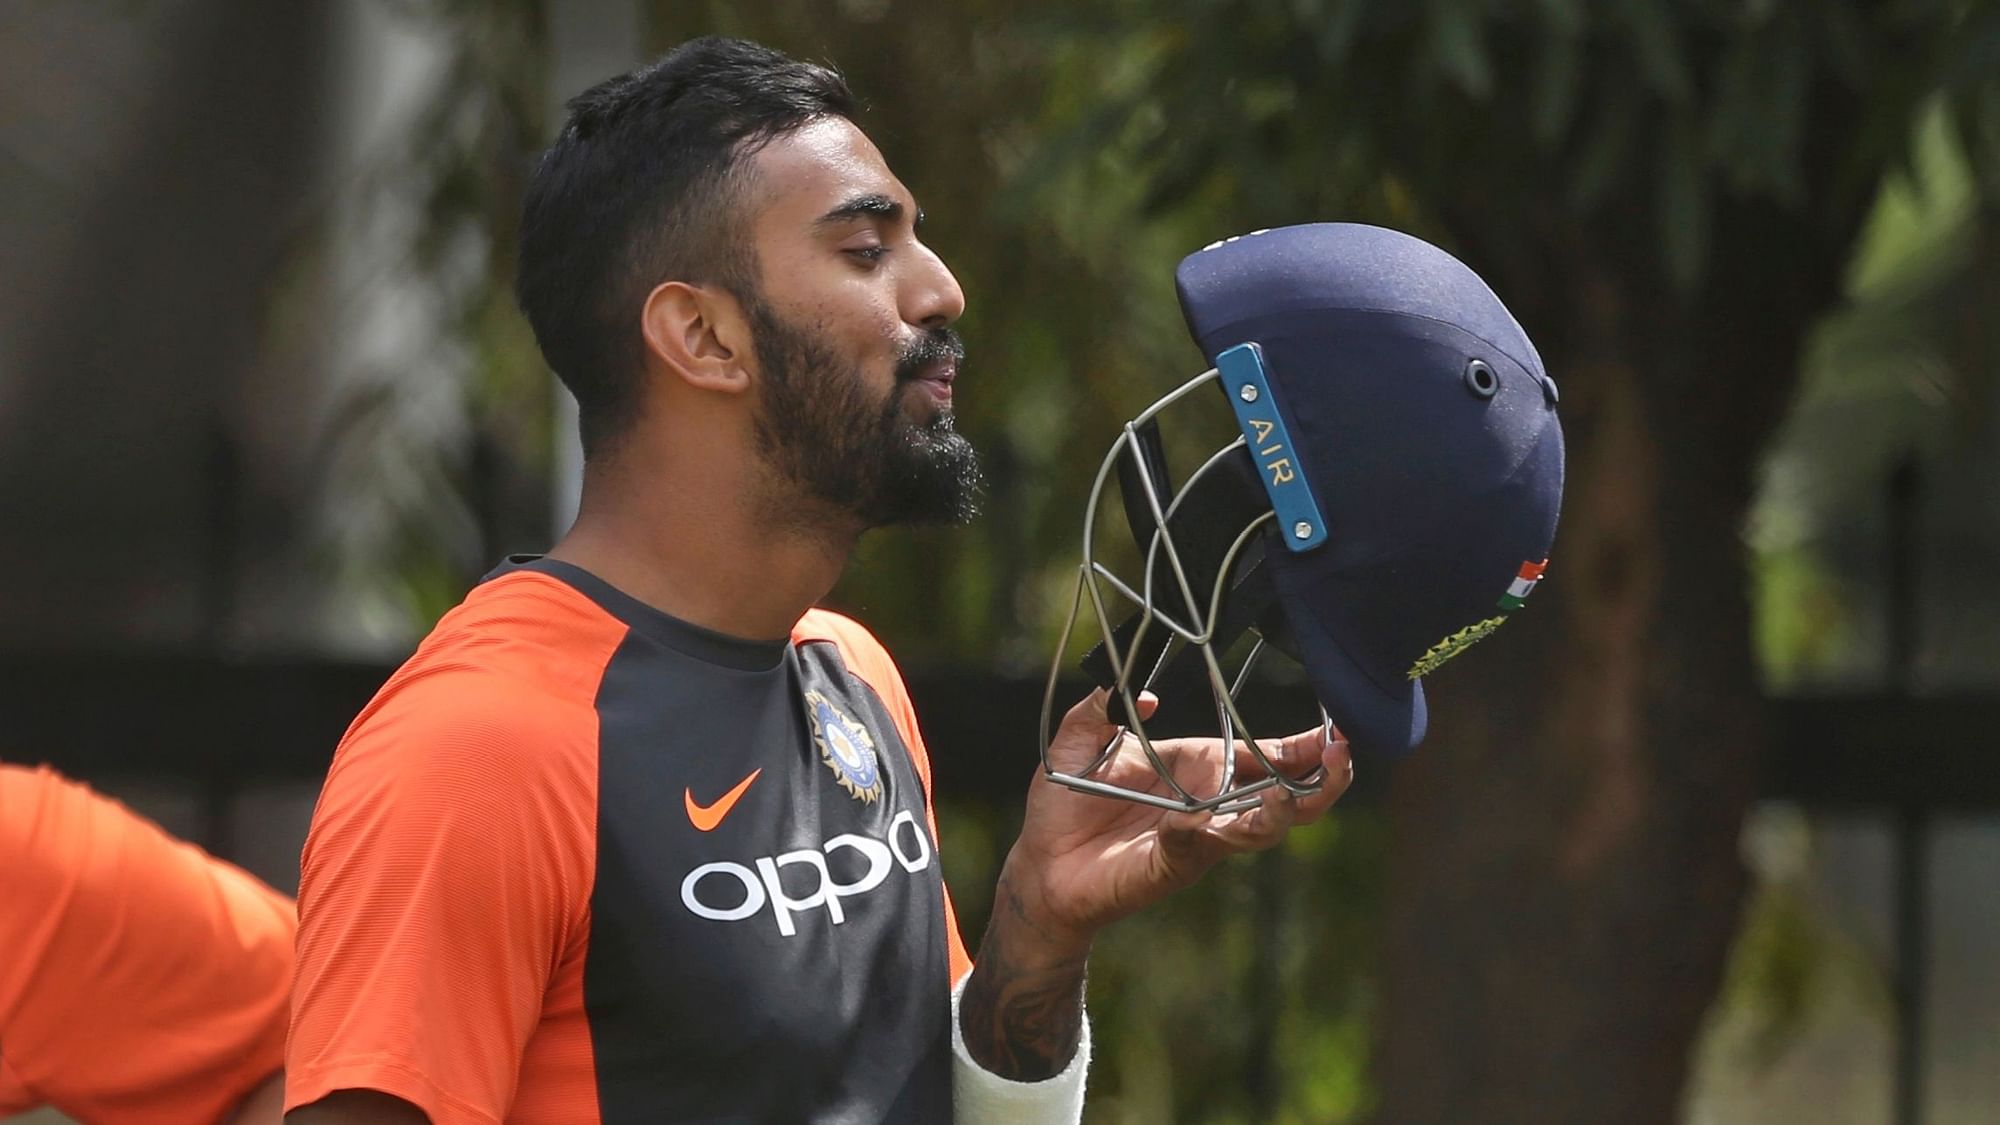 Reserve opener KL Rahul dropped enough hints that he could seamlessly settle into the key number four position.